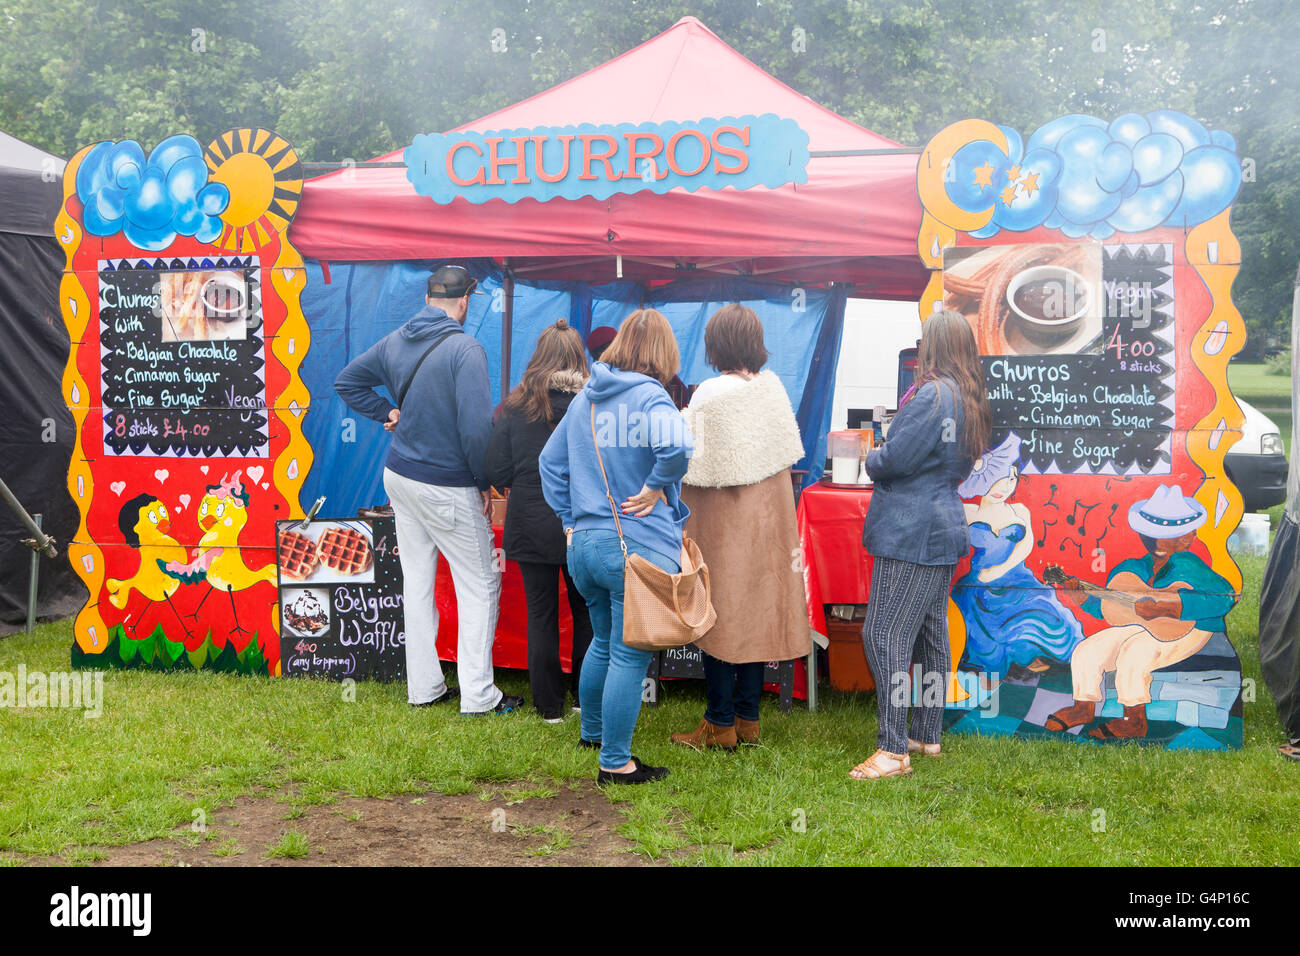 Food stall vans at the Afric Oye festival in Sefton Park, Liverpool, Merseyside, UK Stock Photo